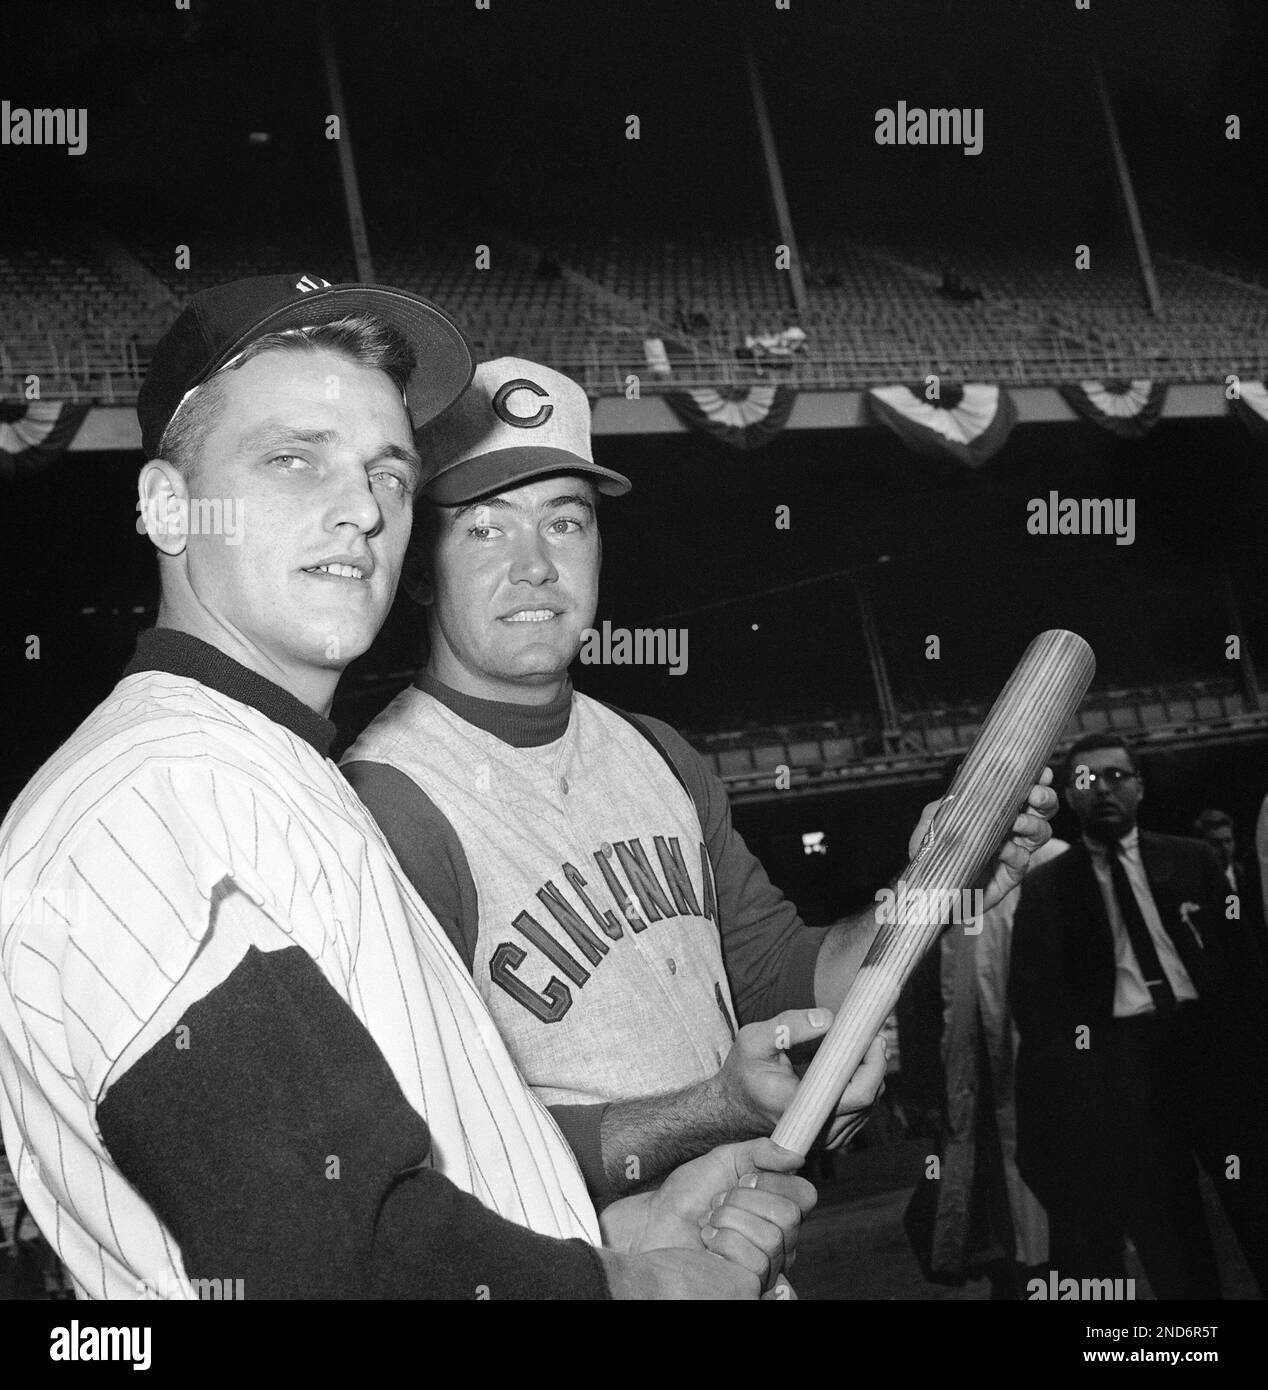 New York Yankee outfielder Roger Maris, left, chats with Cincinnati Red first baseman Gordy Coleman during pre-game workout for World Series opener at Yankee Stadium in New York Oct. 4, 1961. Maris, whose 61 home runs set major league record for full season’s play, will move to center field for series opener replacing ailing Mickey Mantle. (AP Photo) Stock Photo